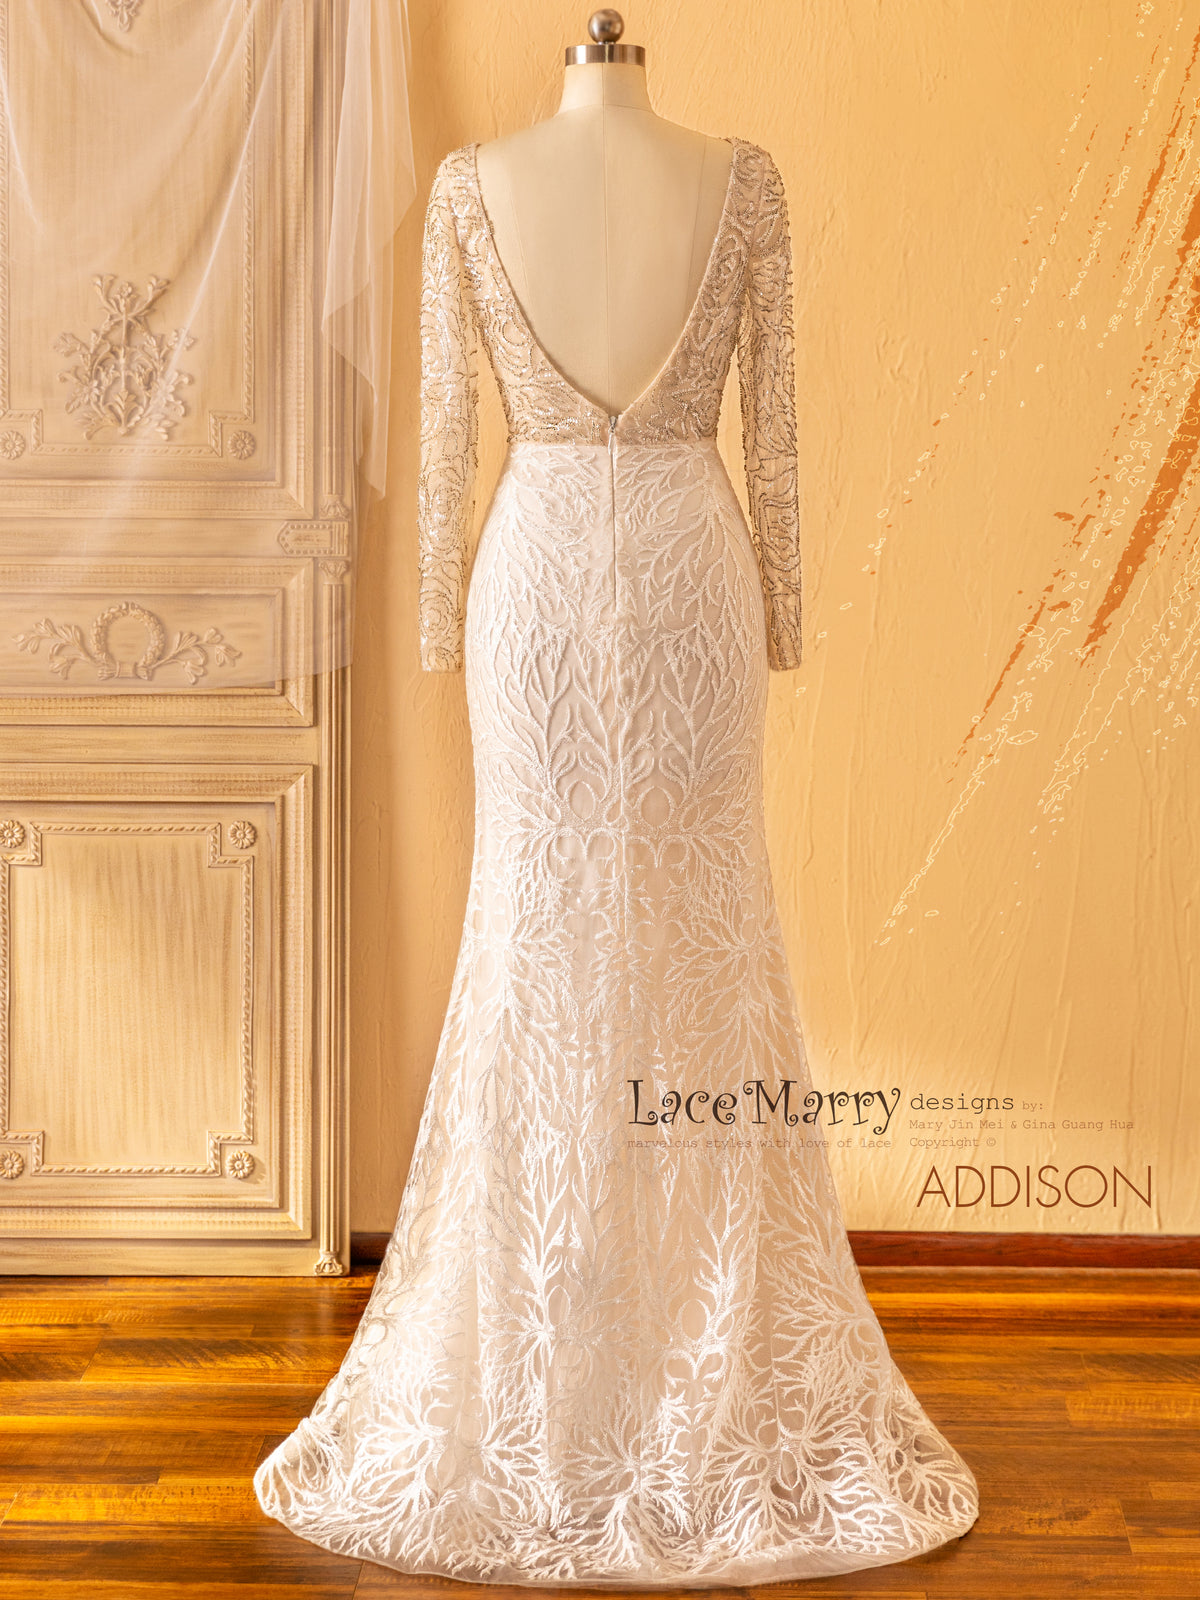 ADDISON / Abstract Pattern Wedding Dress with All Over Spark